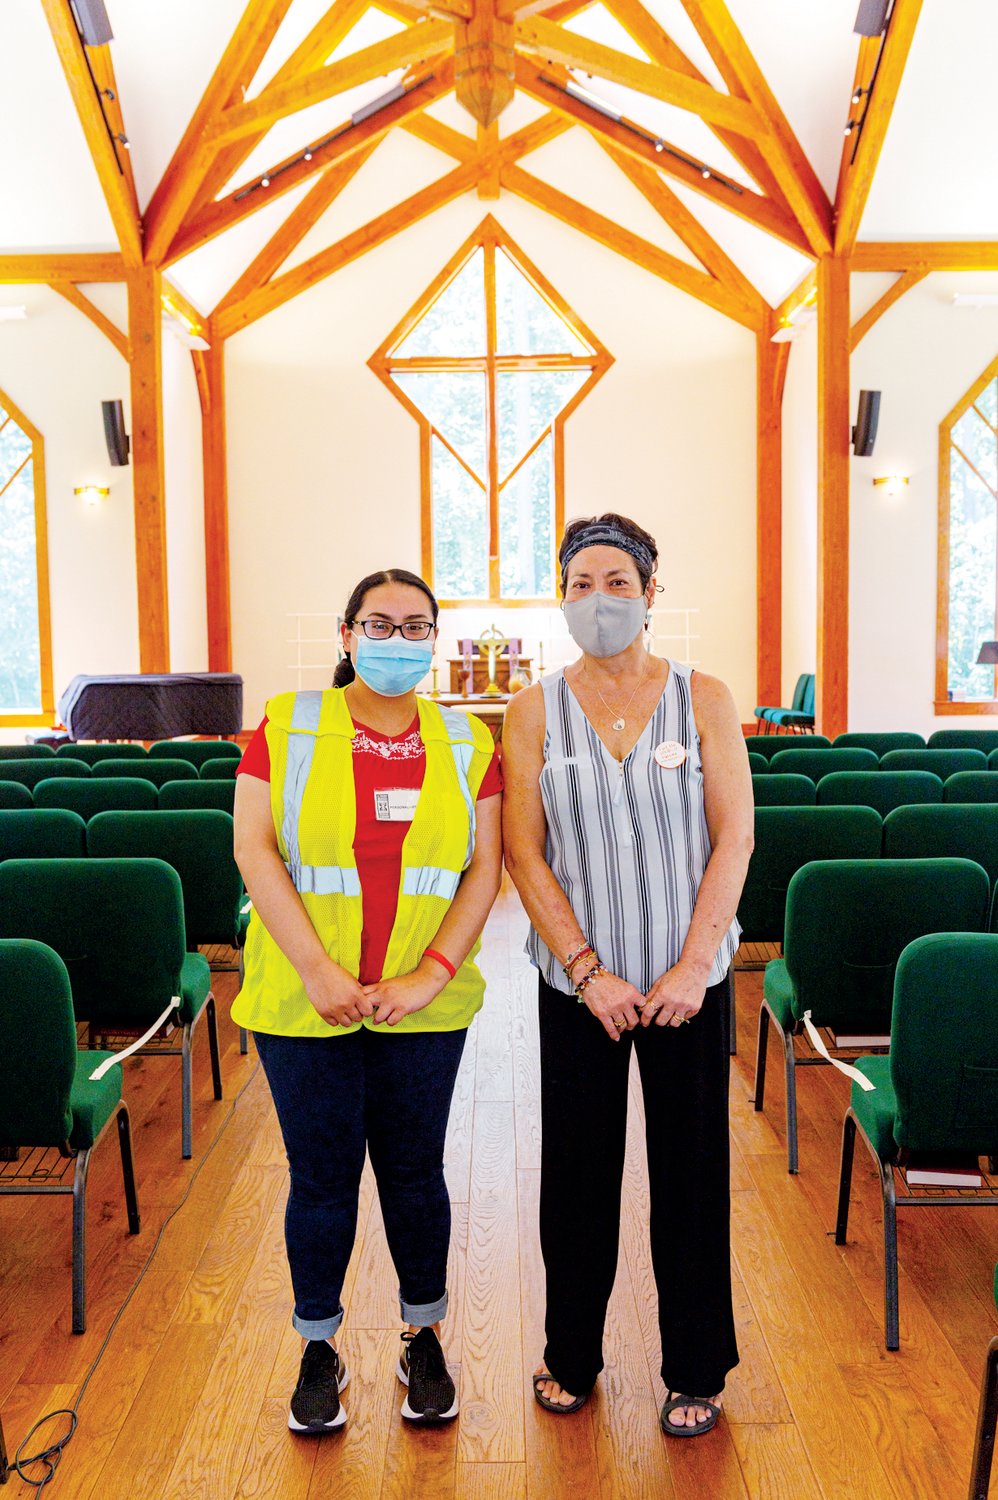 Noemi Mora (left) and Nana Morelli spent the day volunteering at Chapel in the Pines’ Sunday vaccination clinic. Mora works with the Hispanic Liaison while Morelli works with Chapel in the Pines.